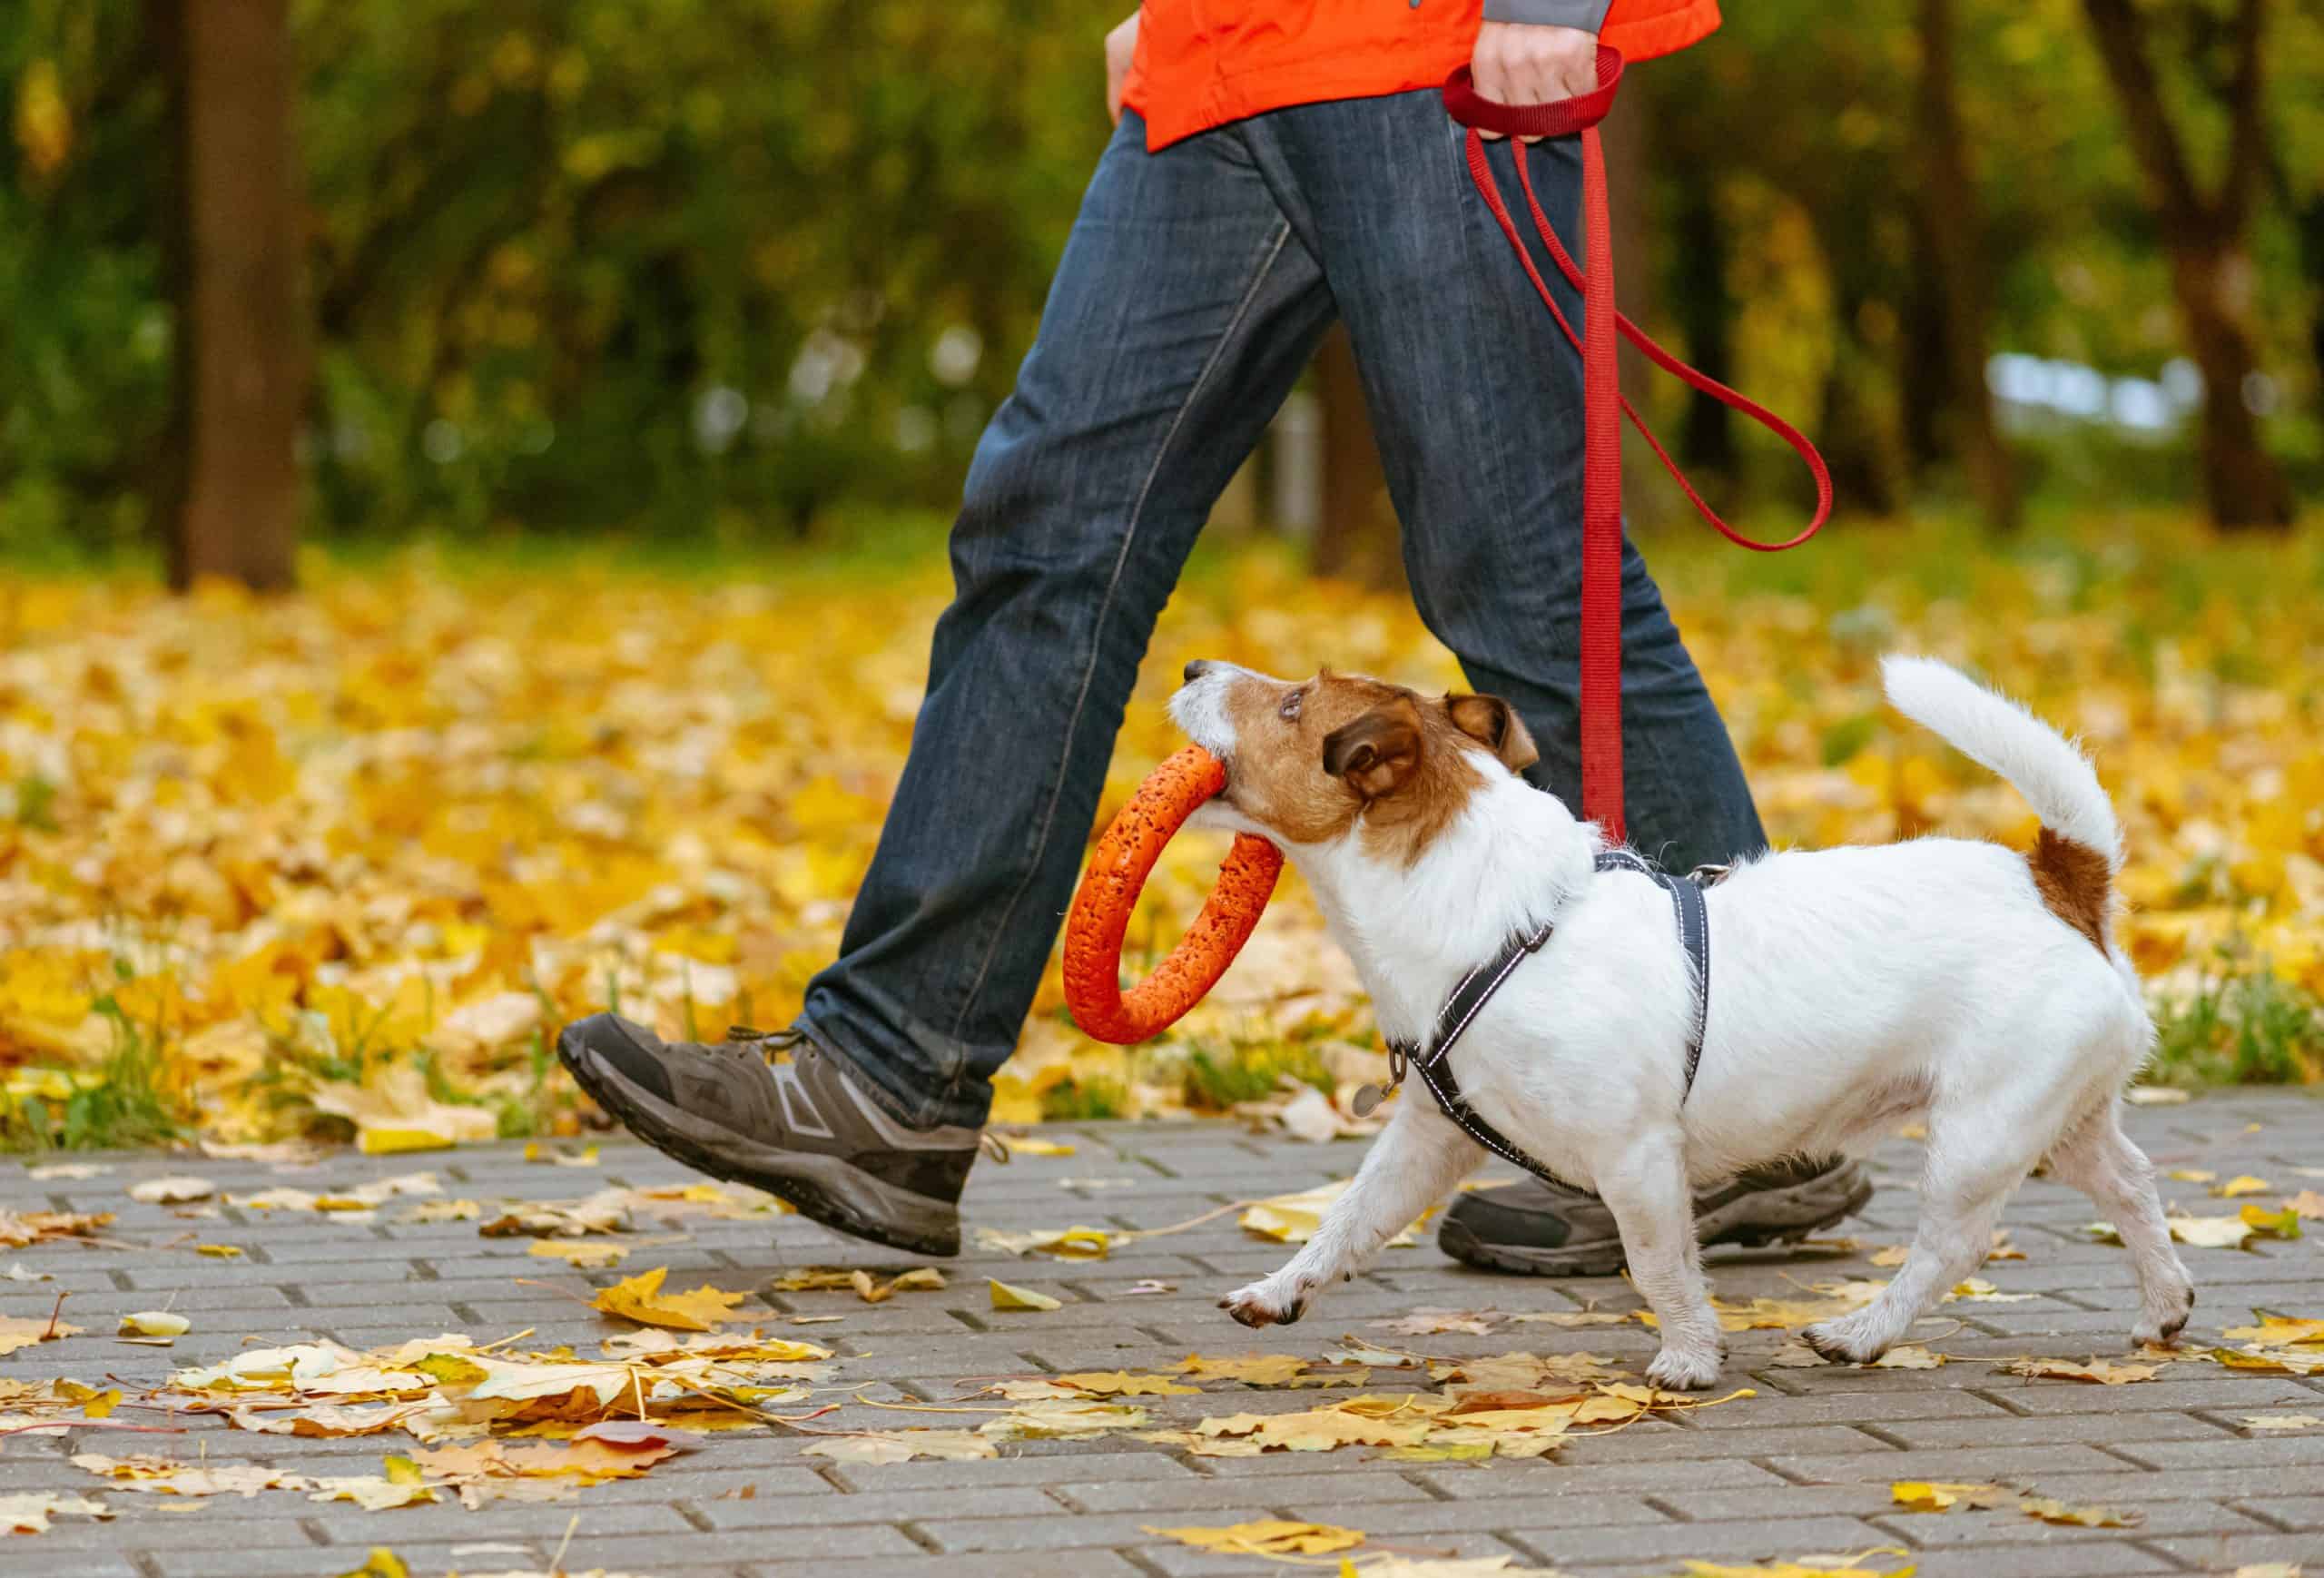 Man walks Jack Russell terrier. To determine how much exercise dogs need, start by considering your dog’s age, health, and breed. Then increase the time gradually.